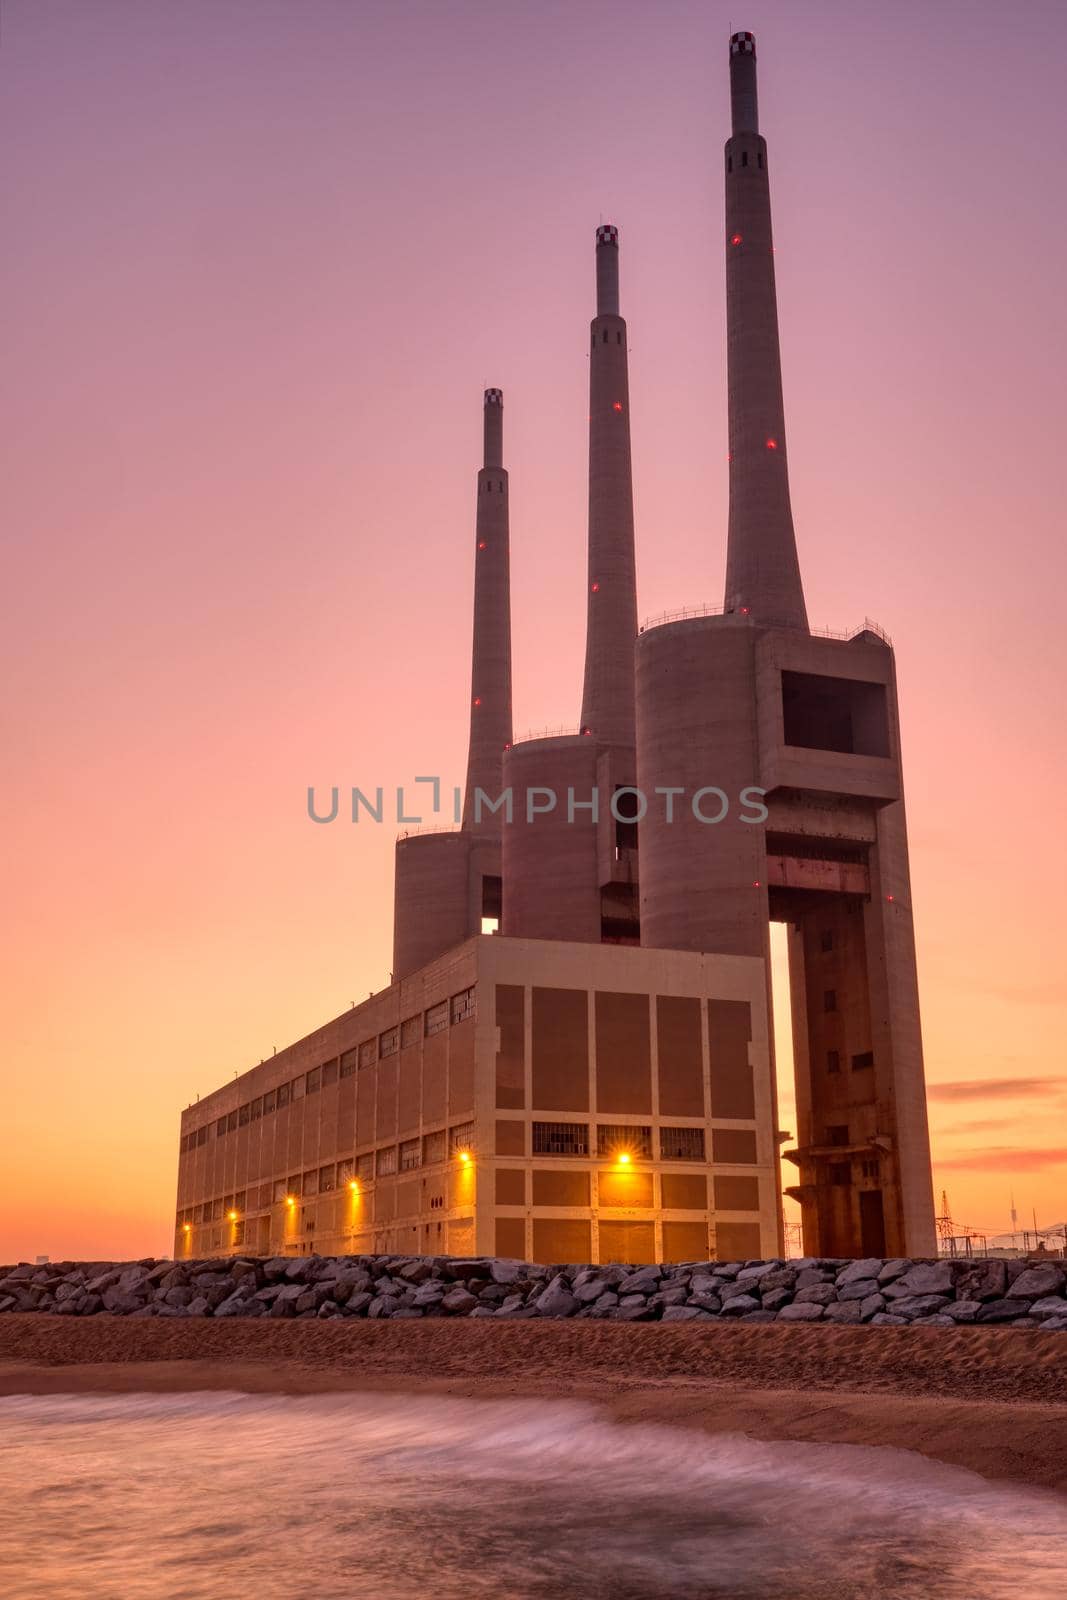 The disused thermal power station near Barcelona by elxeneize